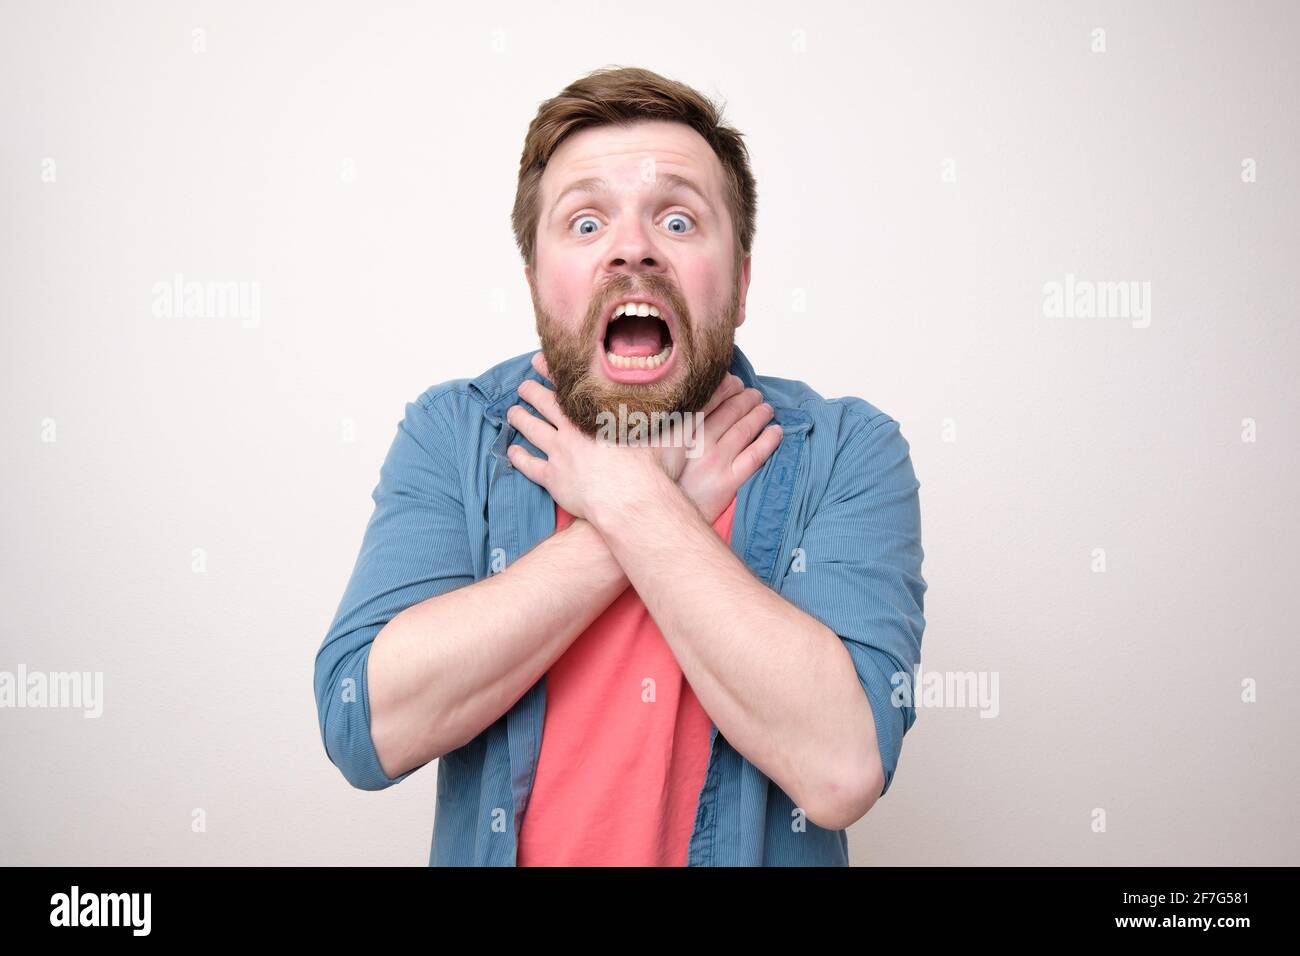 Frightened bearded man suffocates or has a severe sore throat, holding hands on his neck with mouth open. White background. Stock Photo